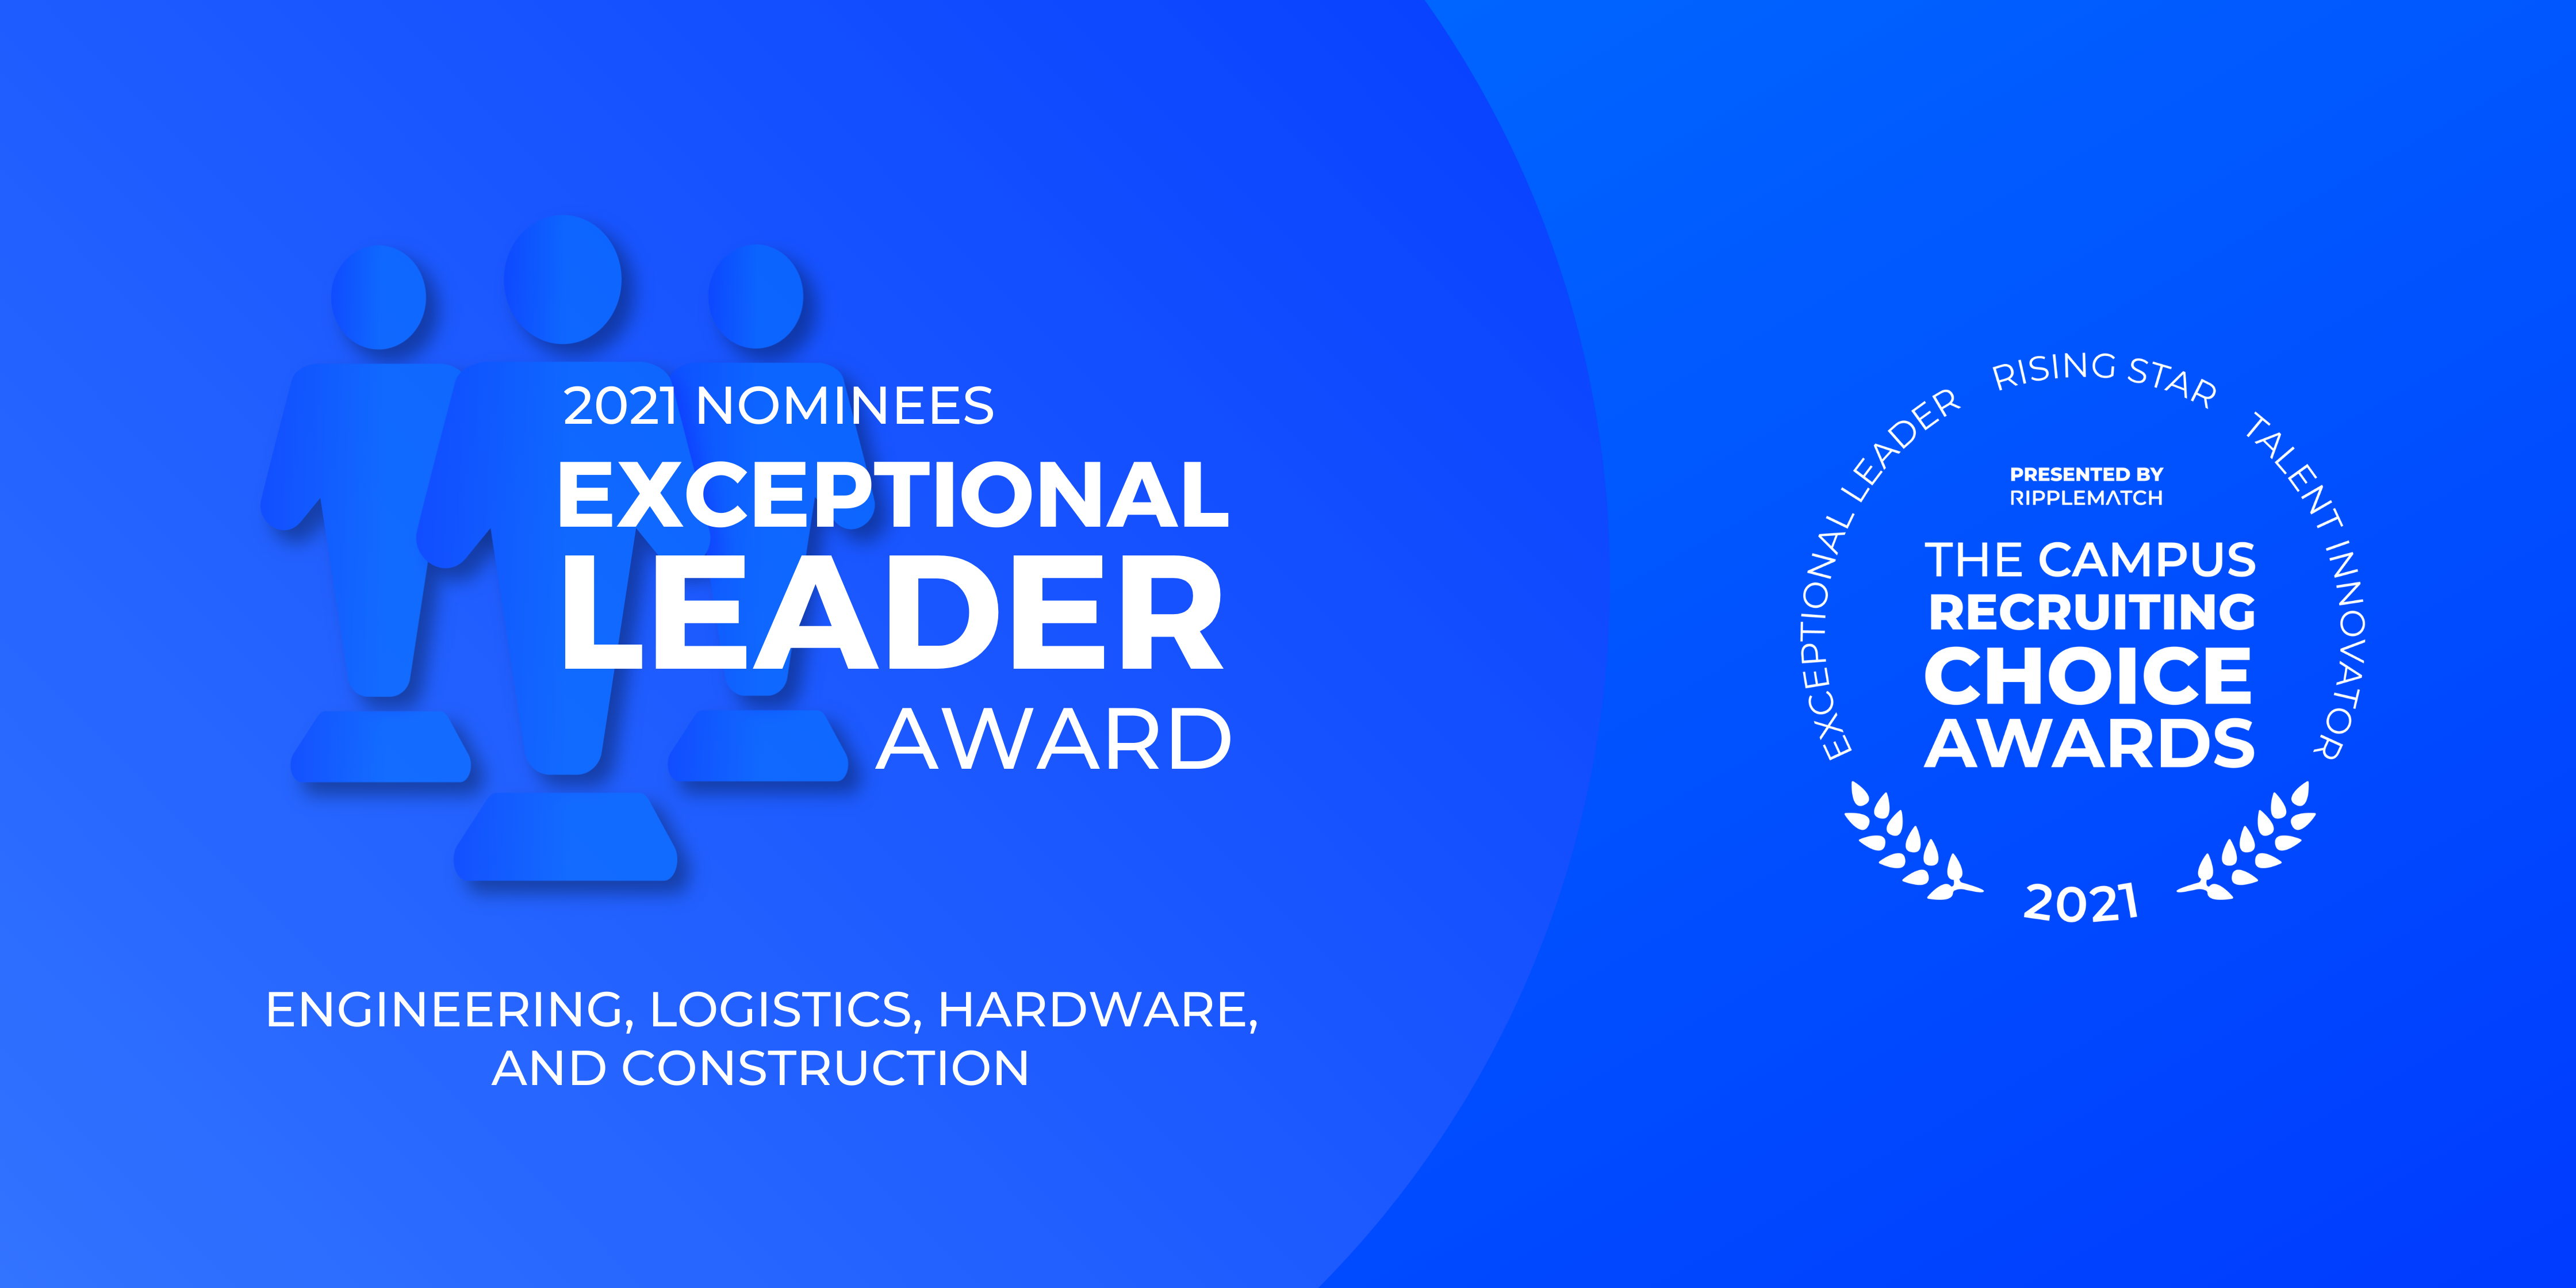 Exceptional Leader Award - Engineering, Logistics, Hardware, and Construction